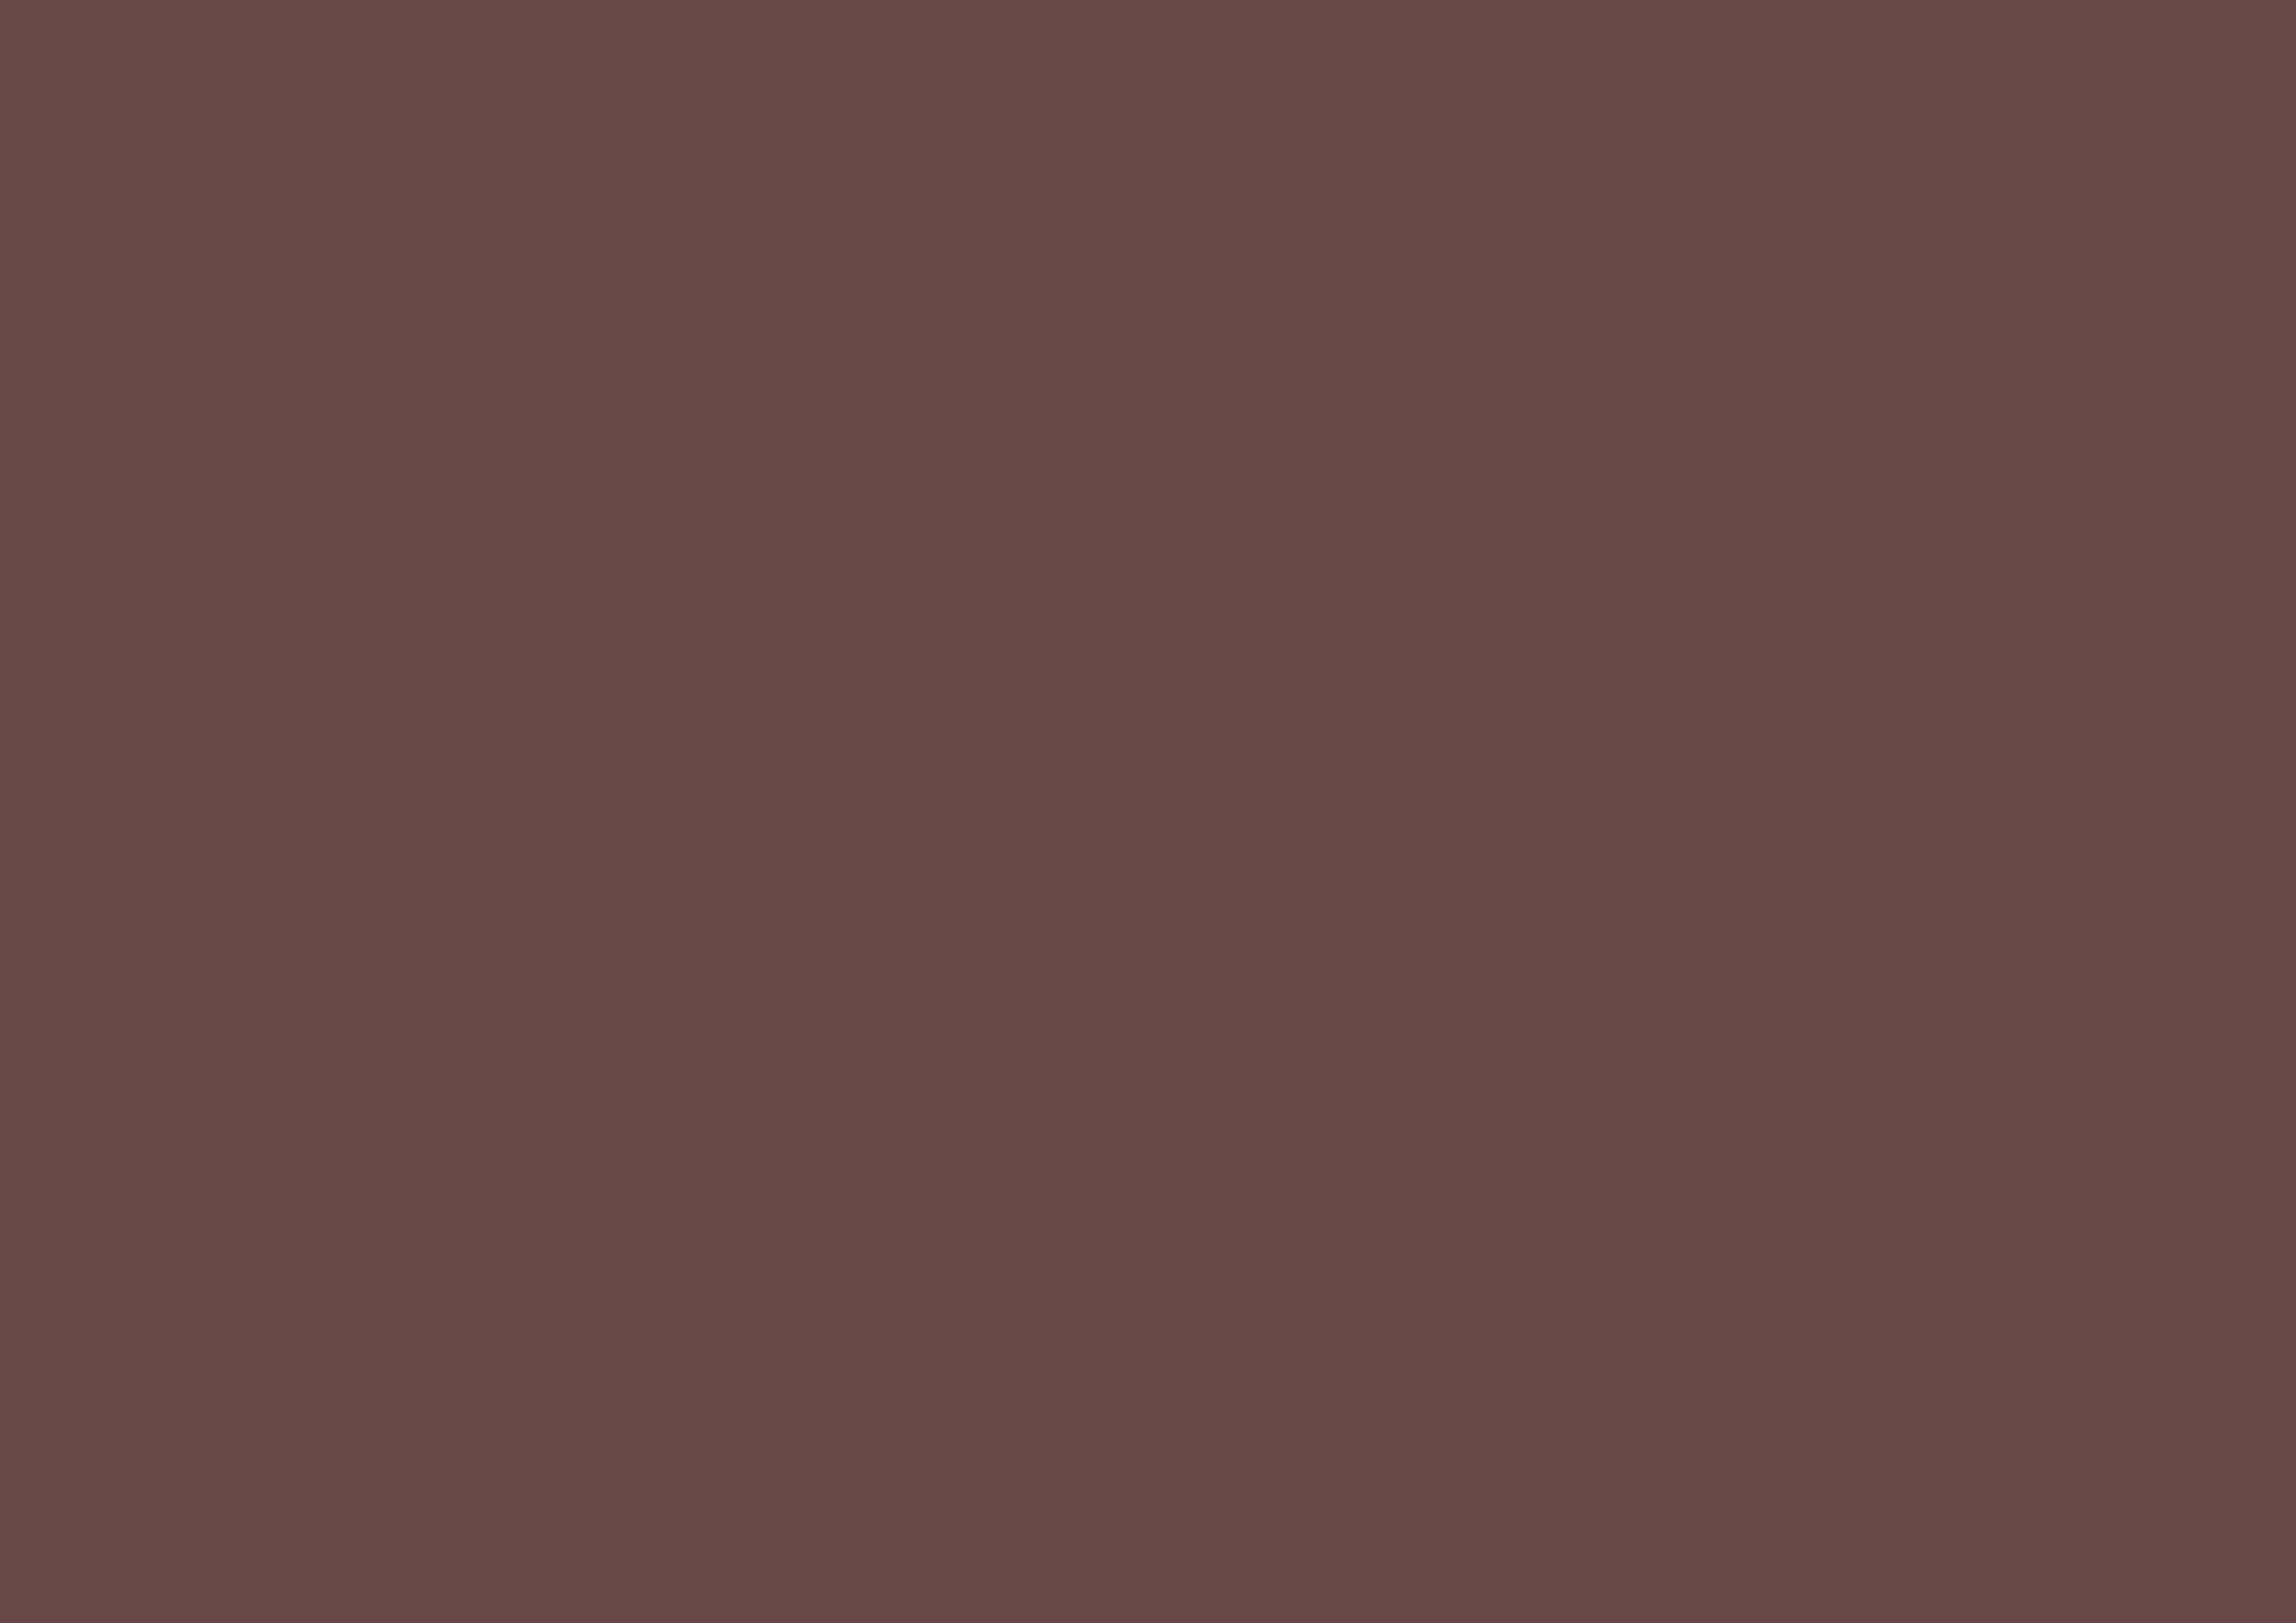 3508x2480 Rose Ebony Solid Color Background